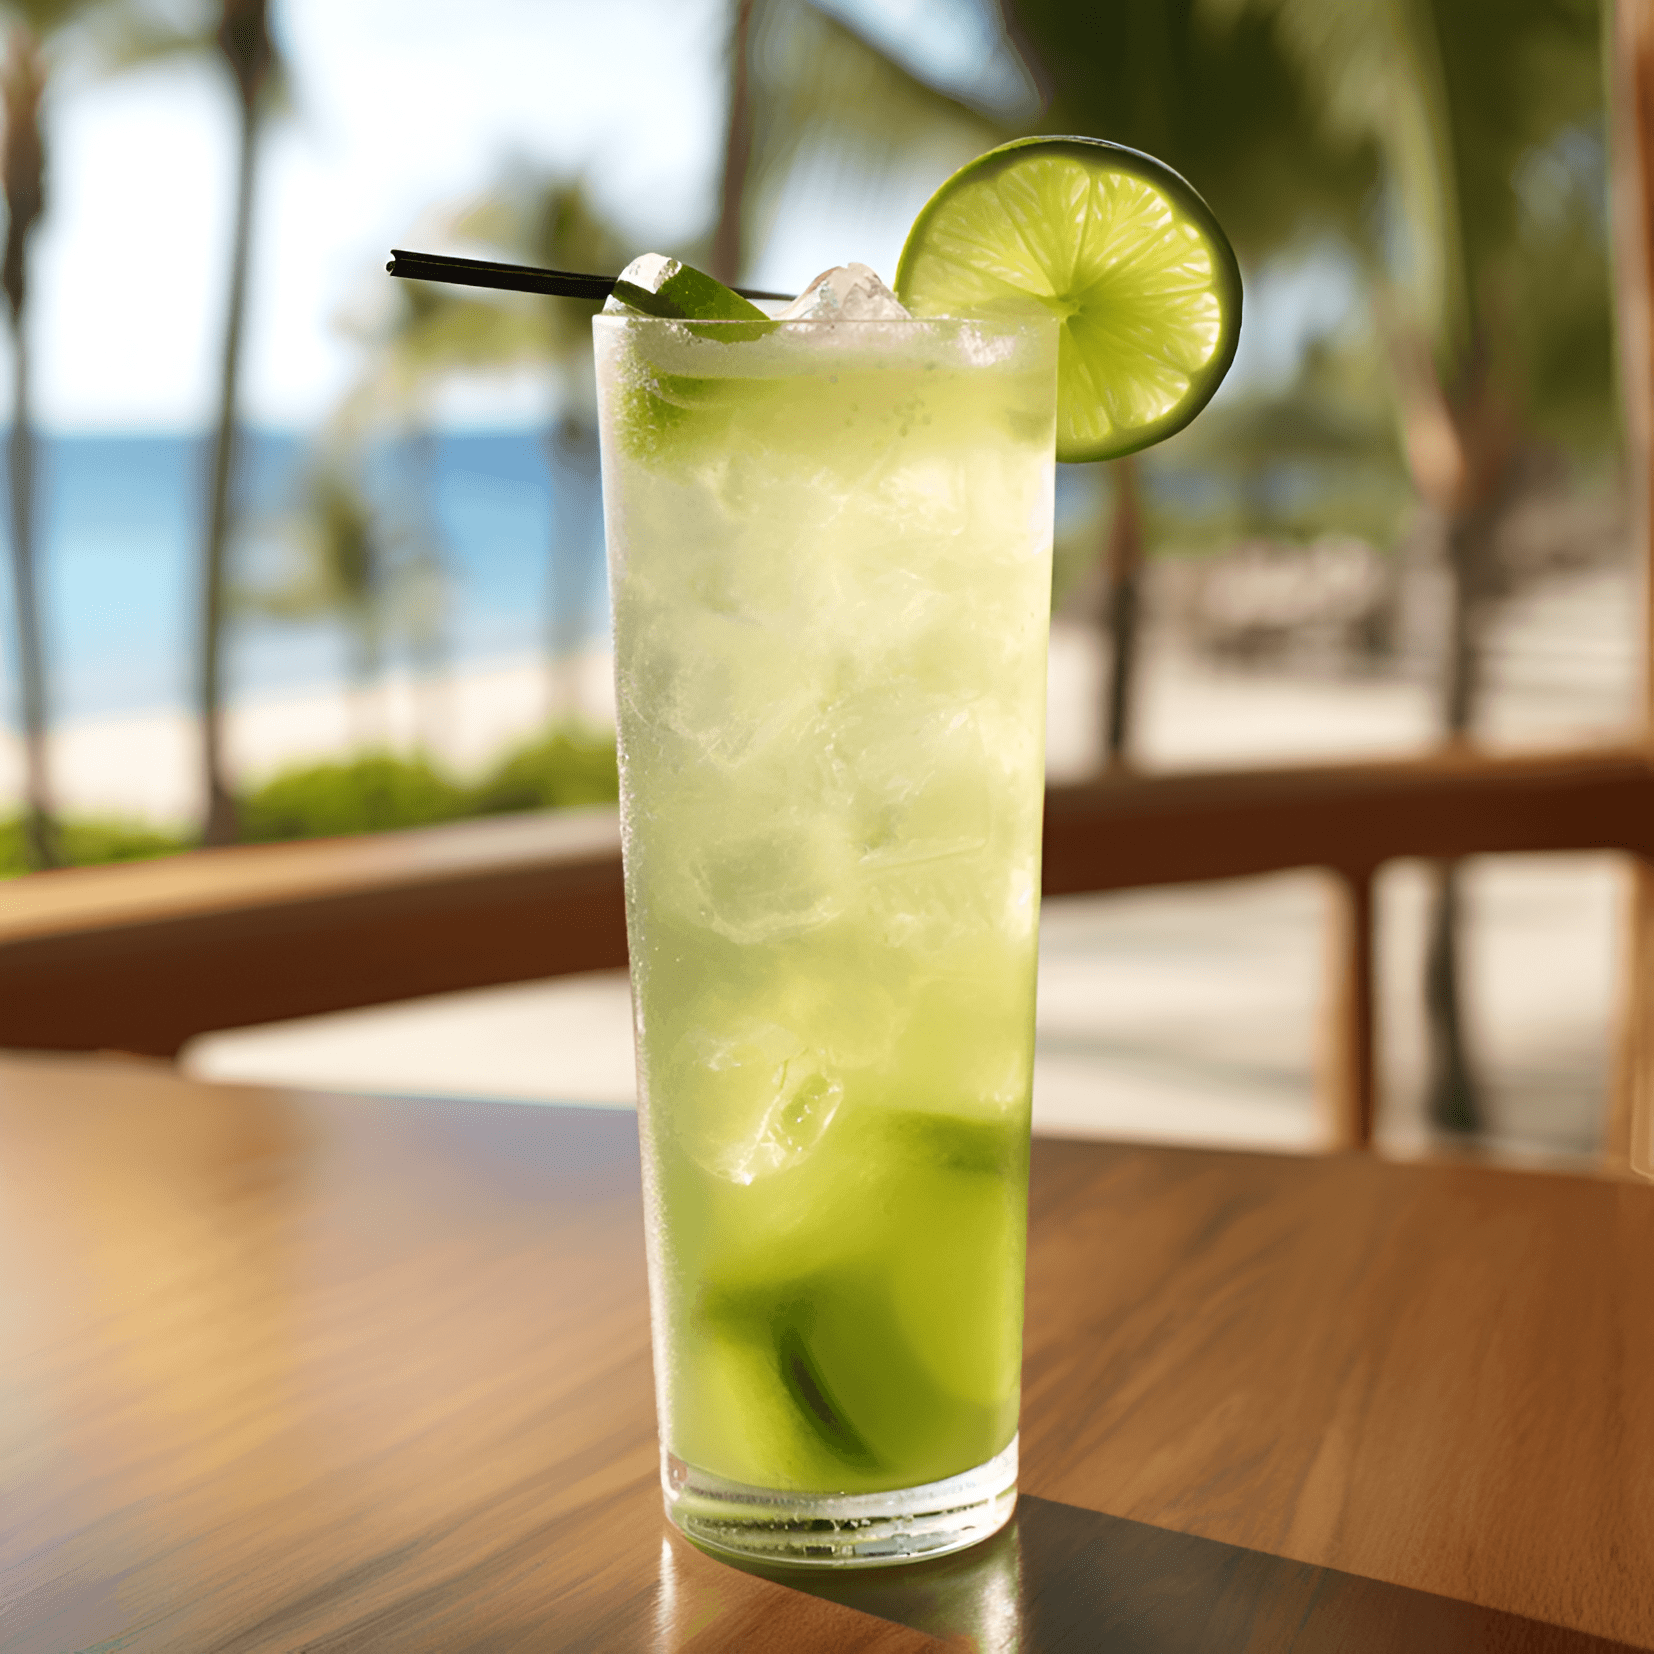 Limeade Cocktail Recipe - Limeade is a bright, tangy, and slightly sweet cocktail with a refreshing citrus flavor. It has a light and crisp taste that is perfect for sipping on a warm summer day.